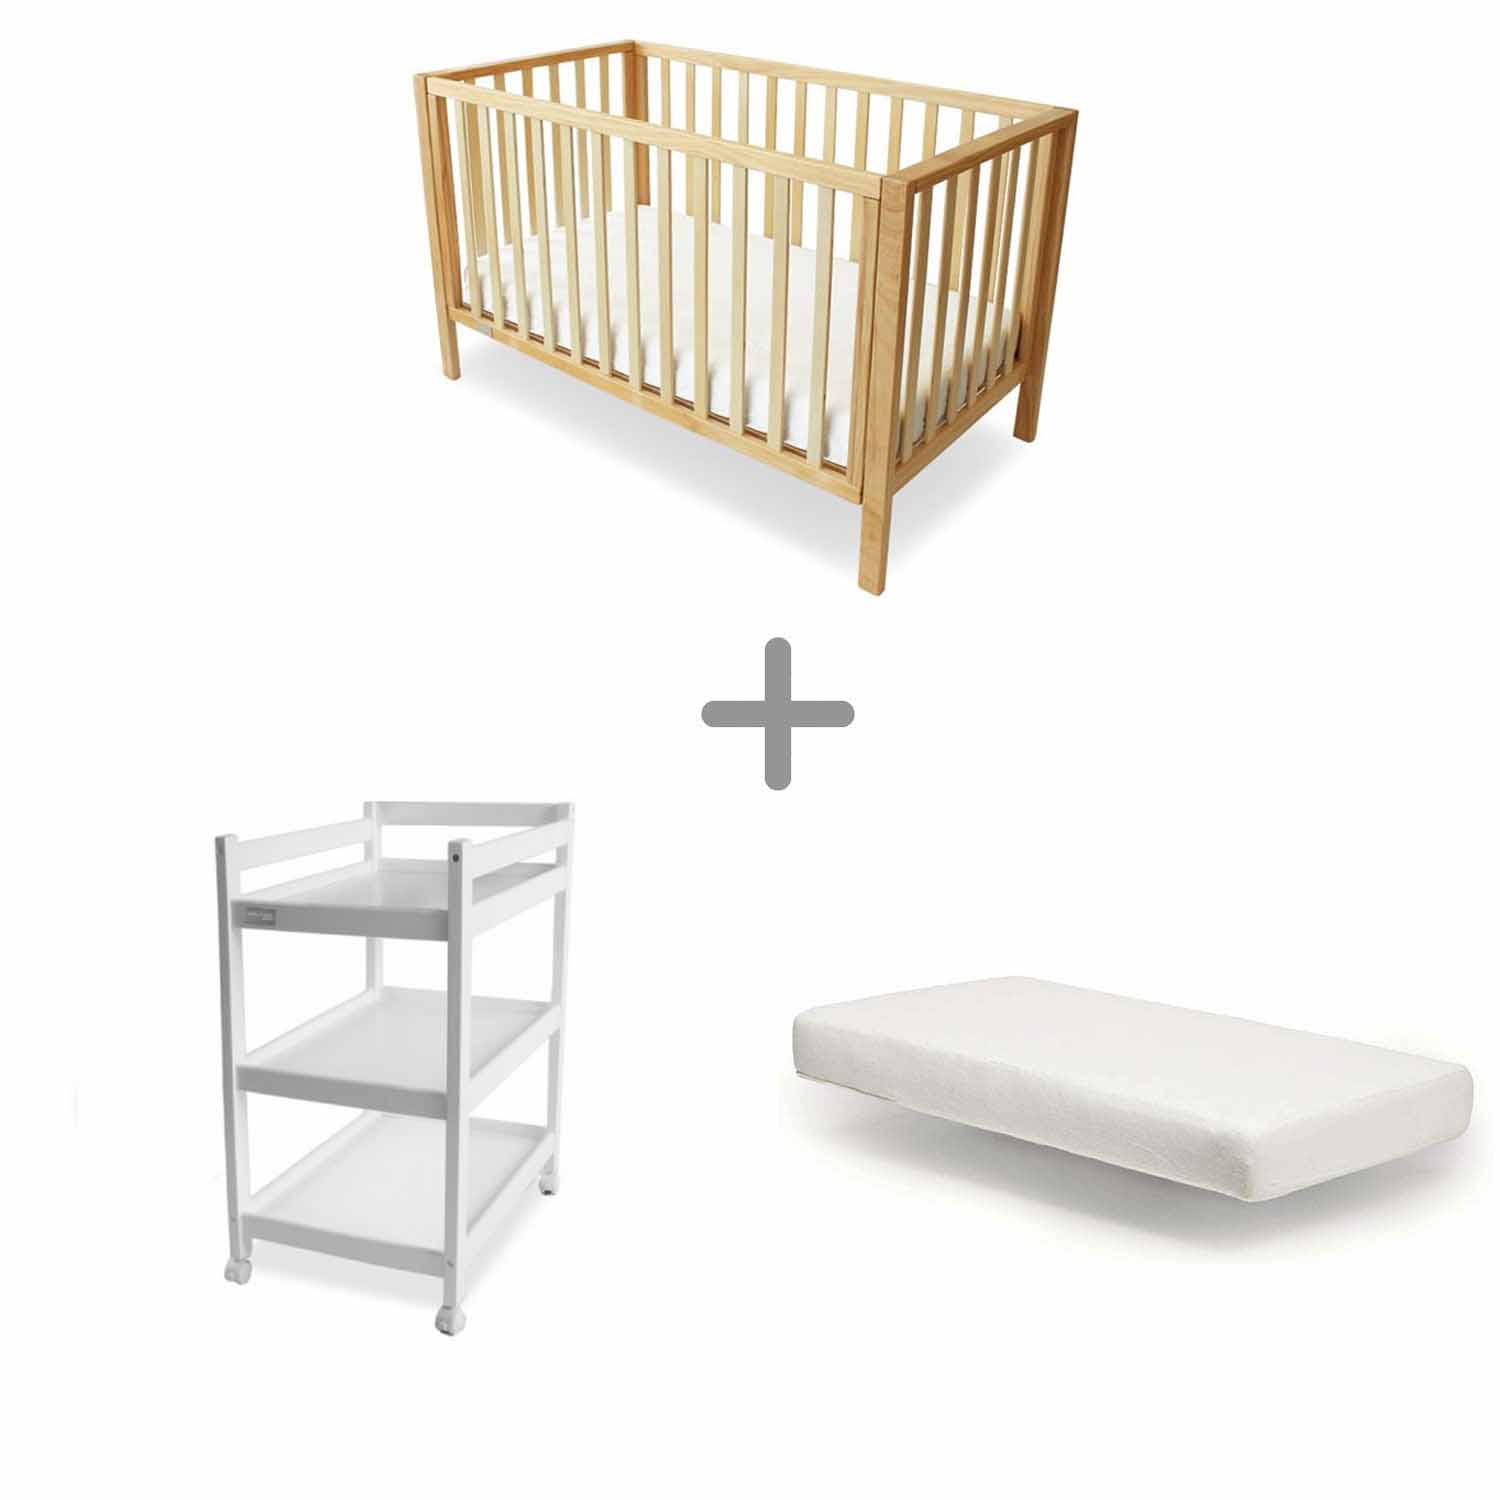 cot change table package